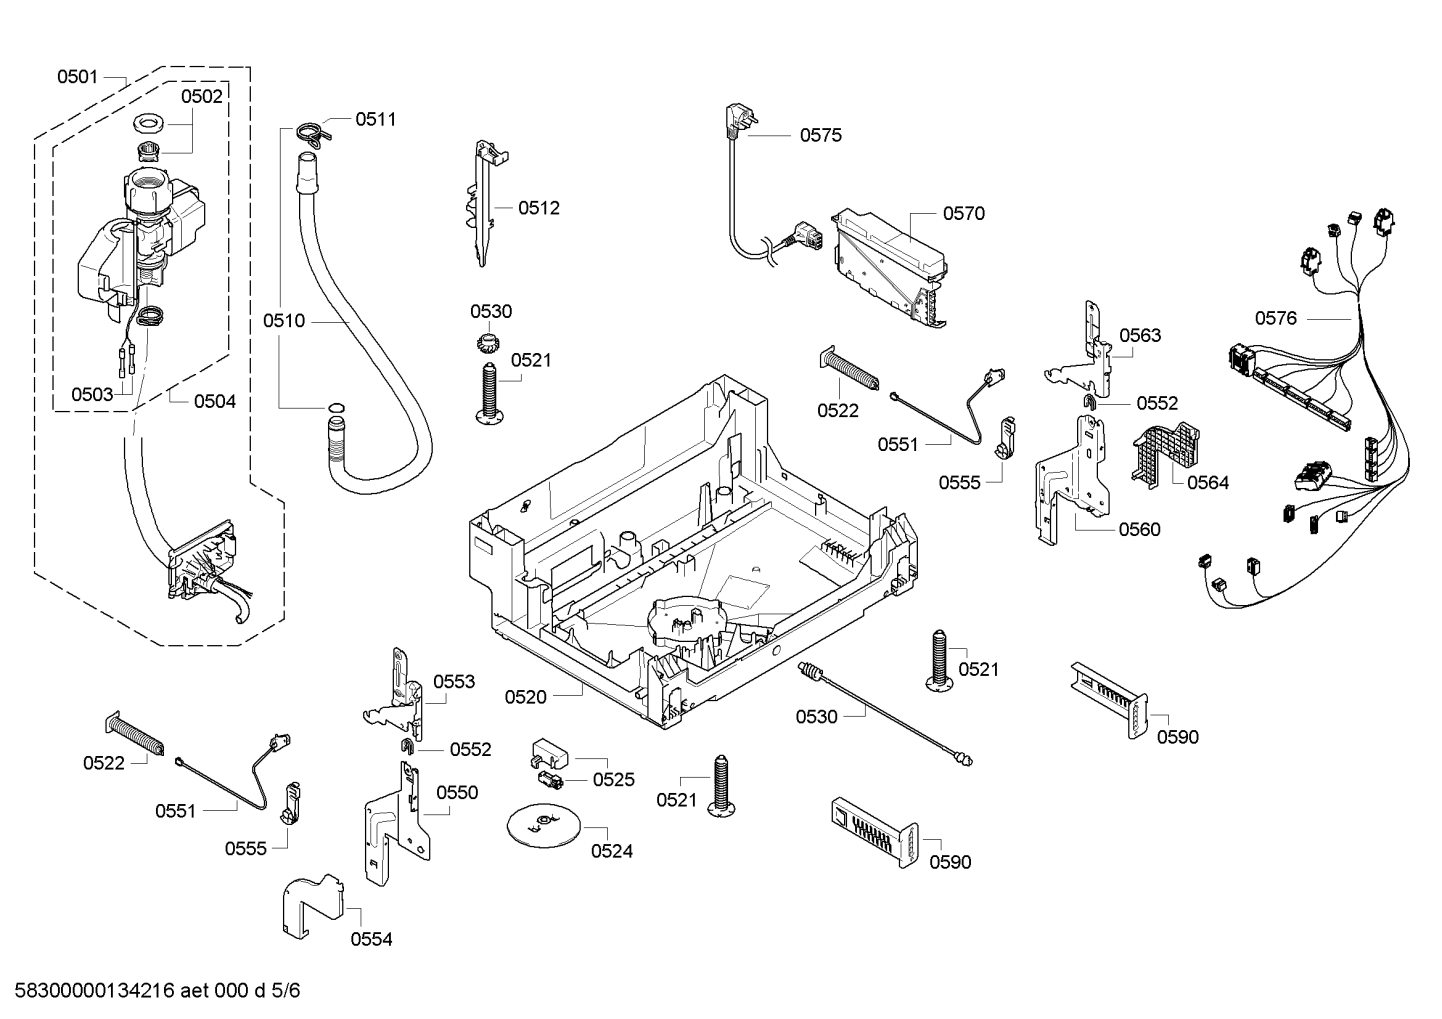 drawing_link_5_device_1557131